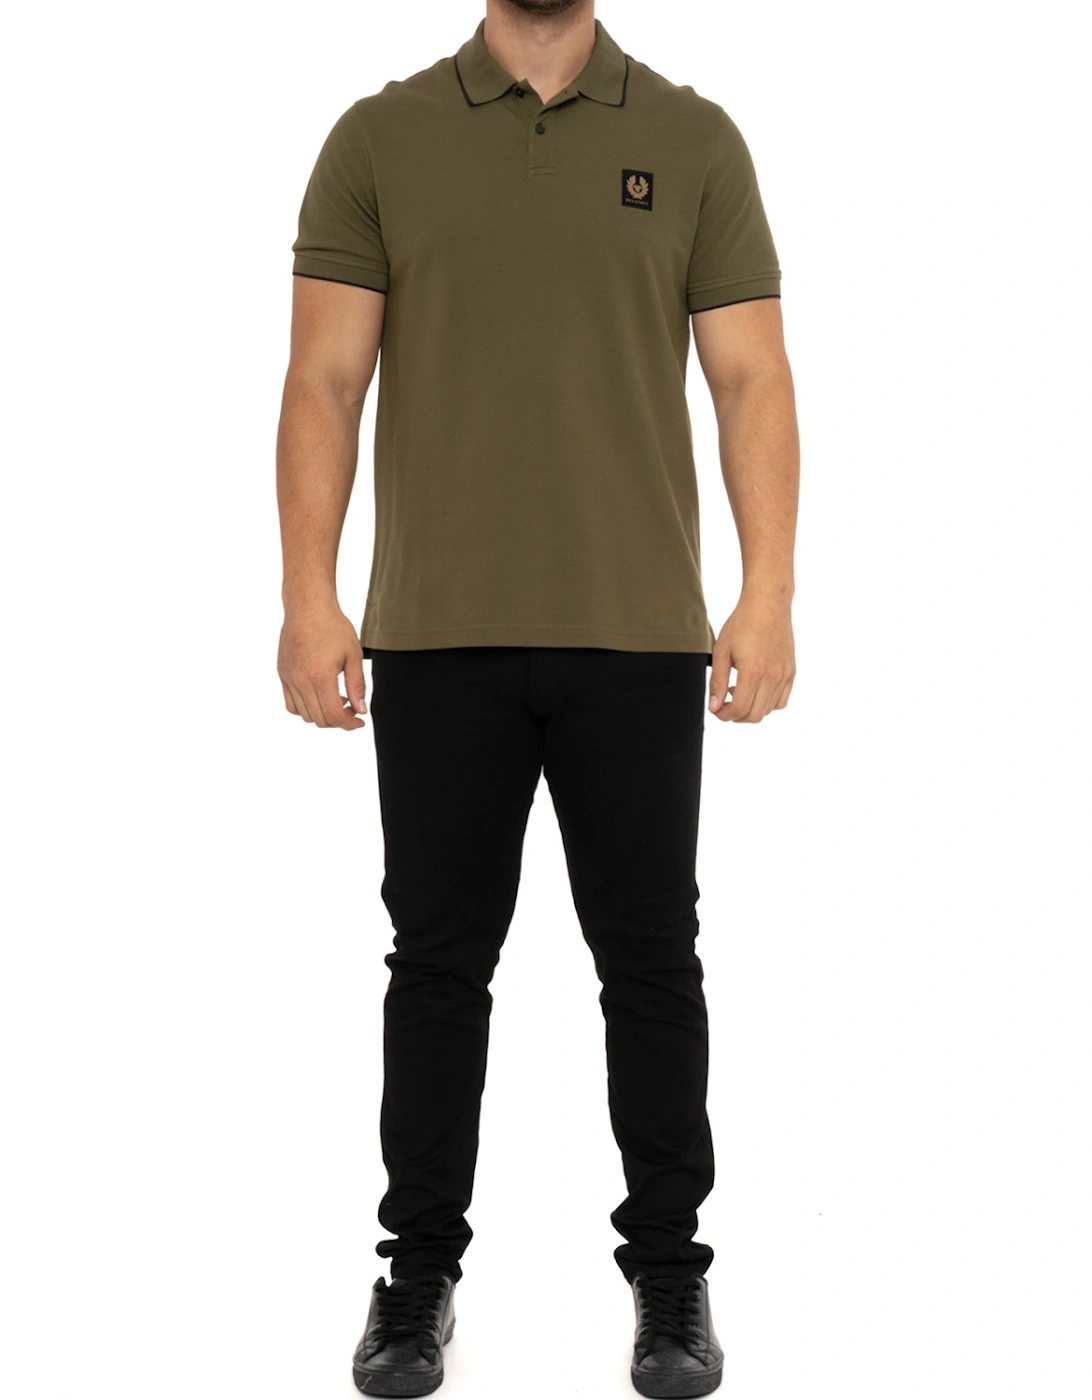 Mens Tipped Collar Polo Shirt (Olive)